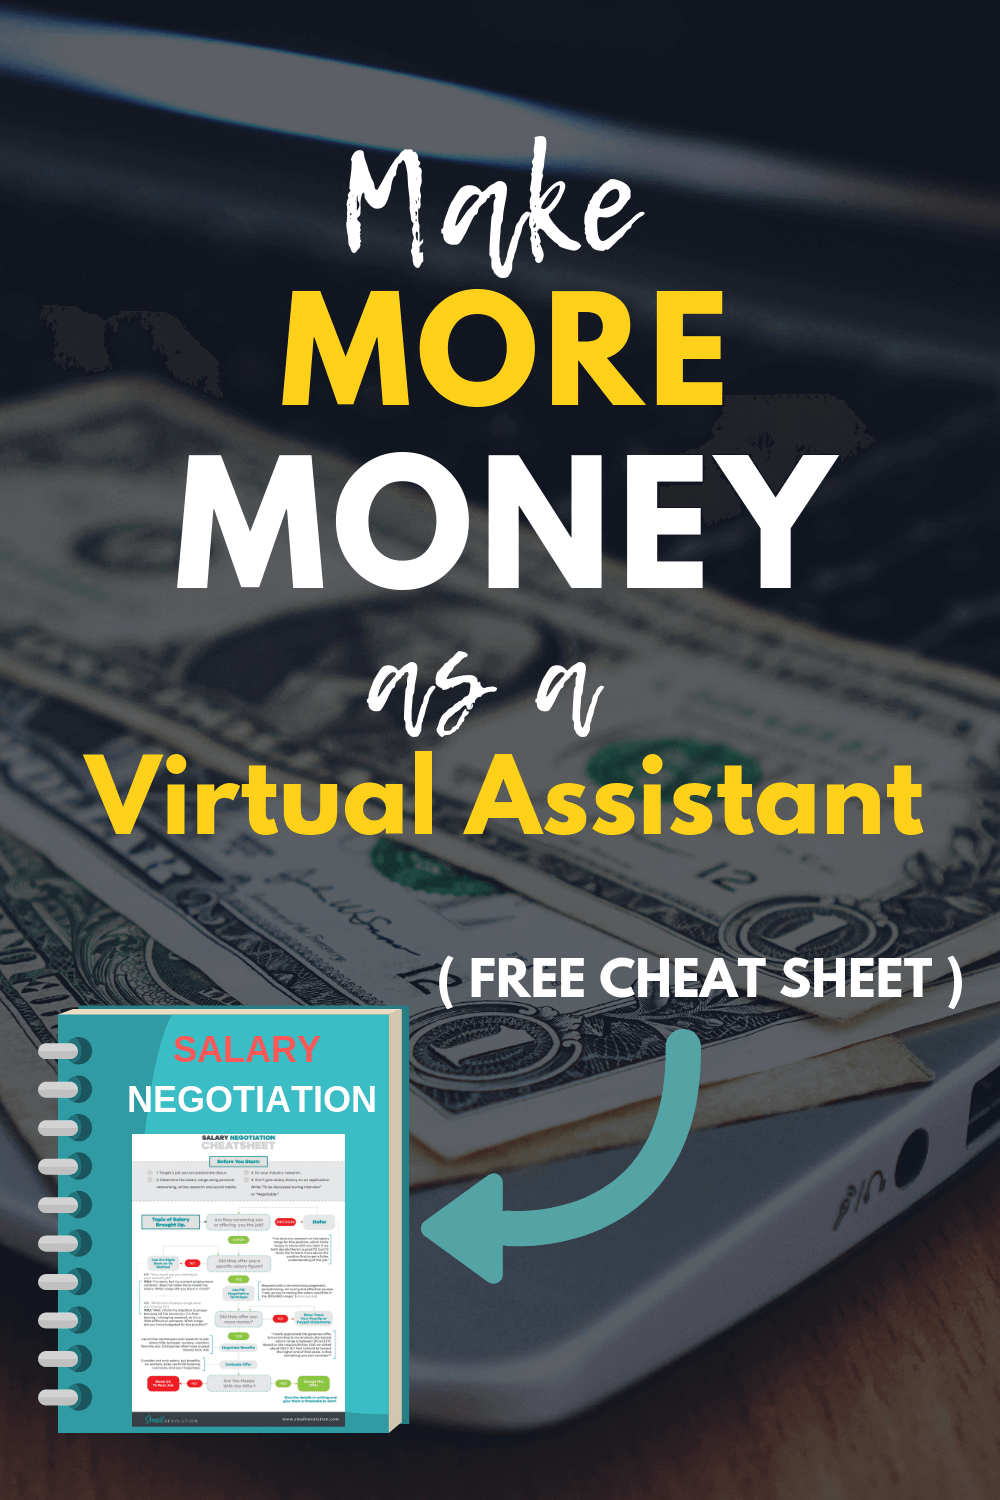 Make more money as a virtual assistant